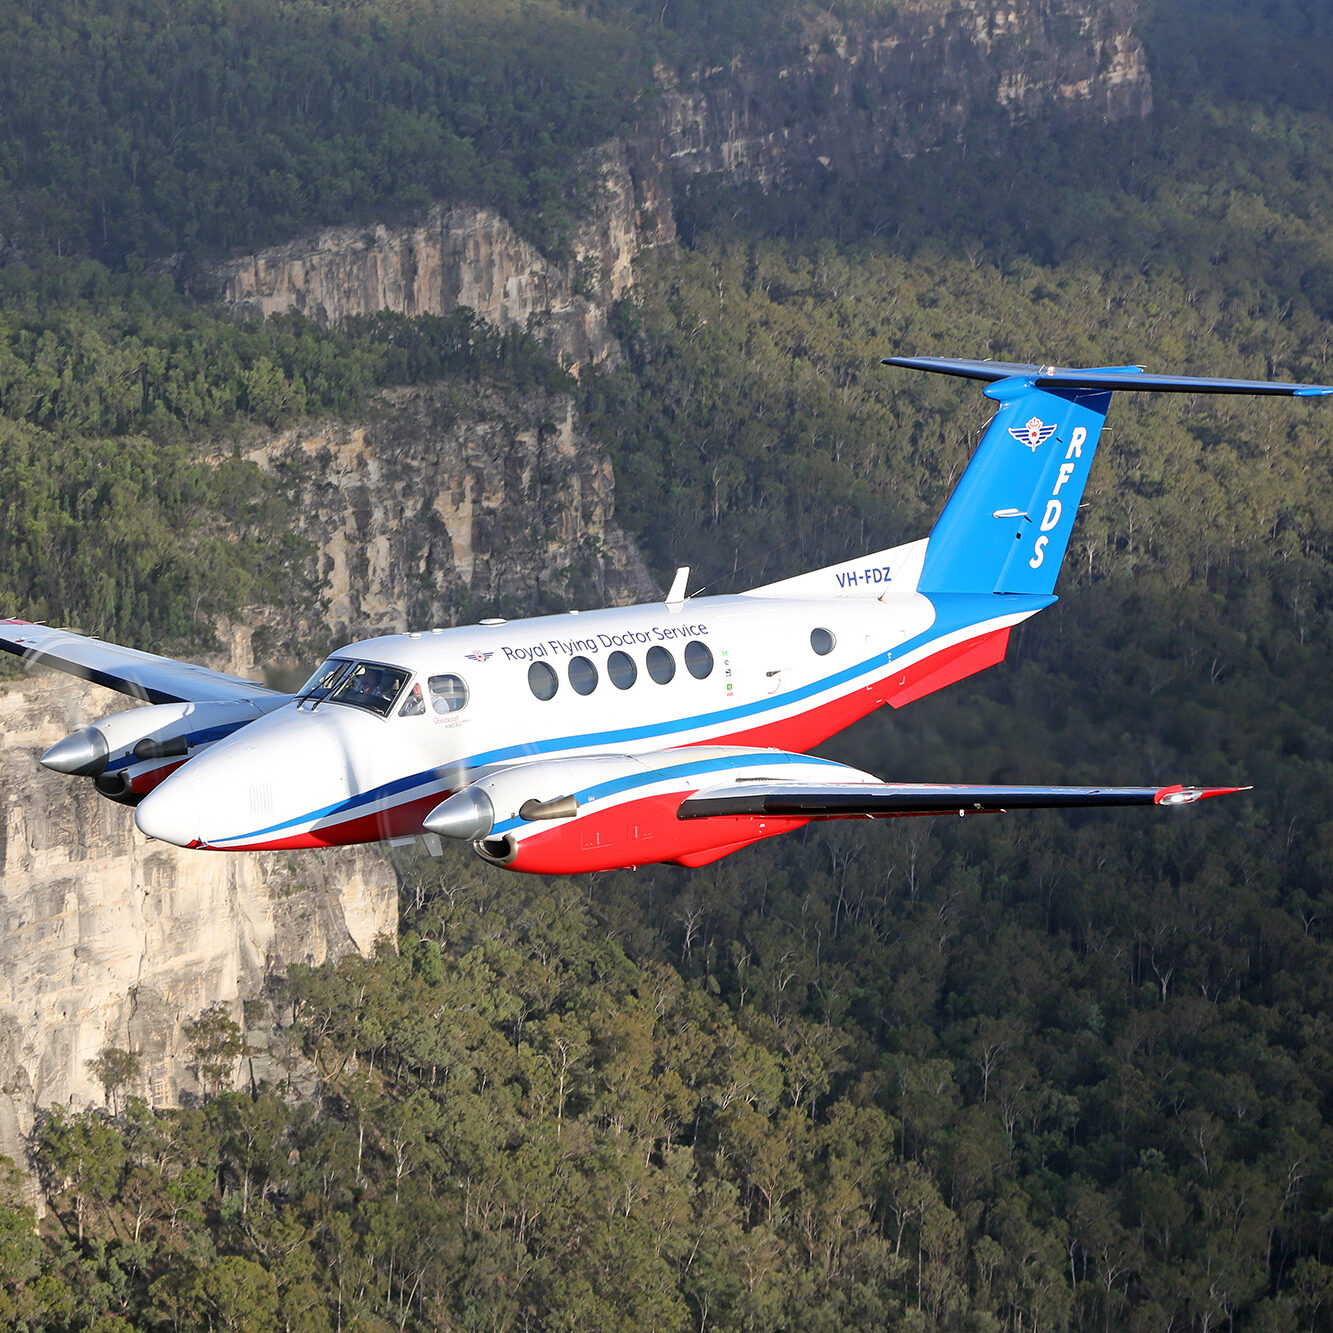 The Royal Flying Doctor Service of Australia (RFDS)